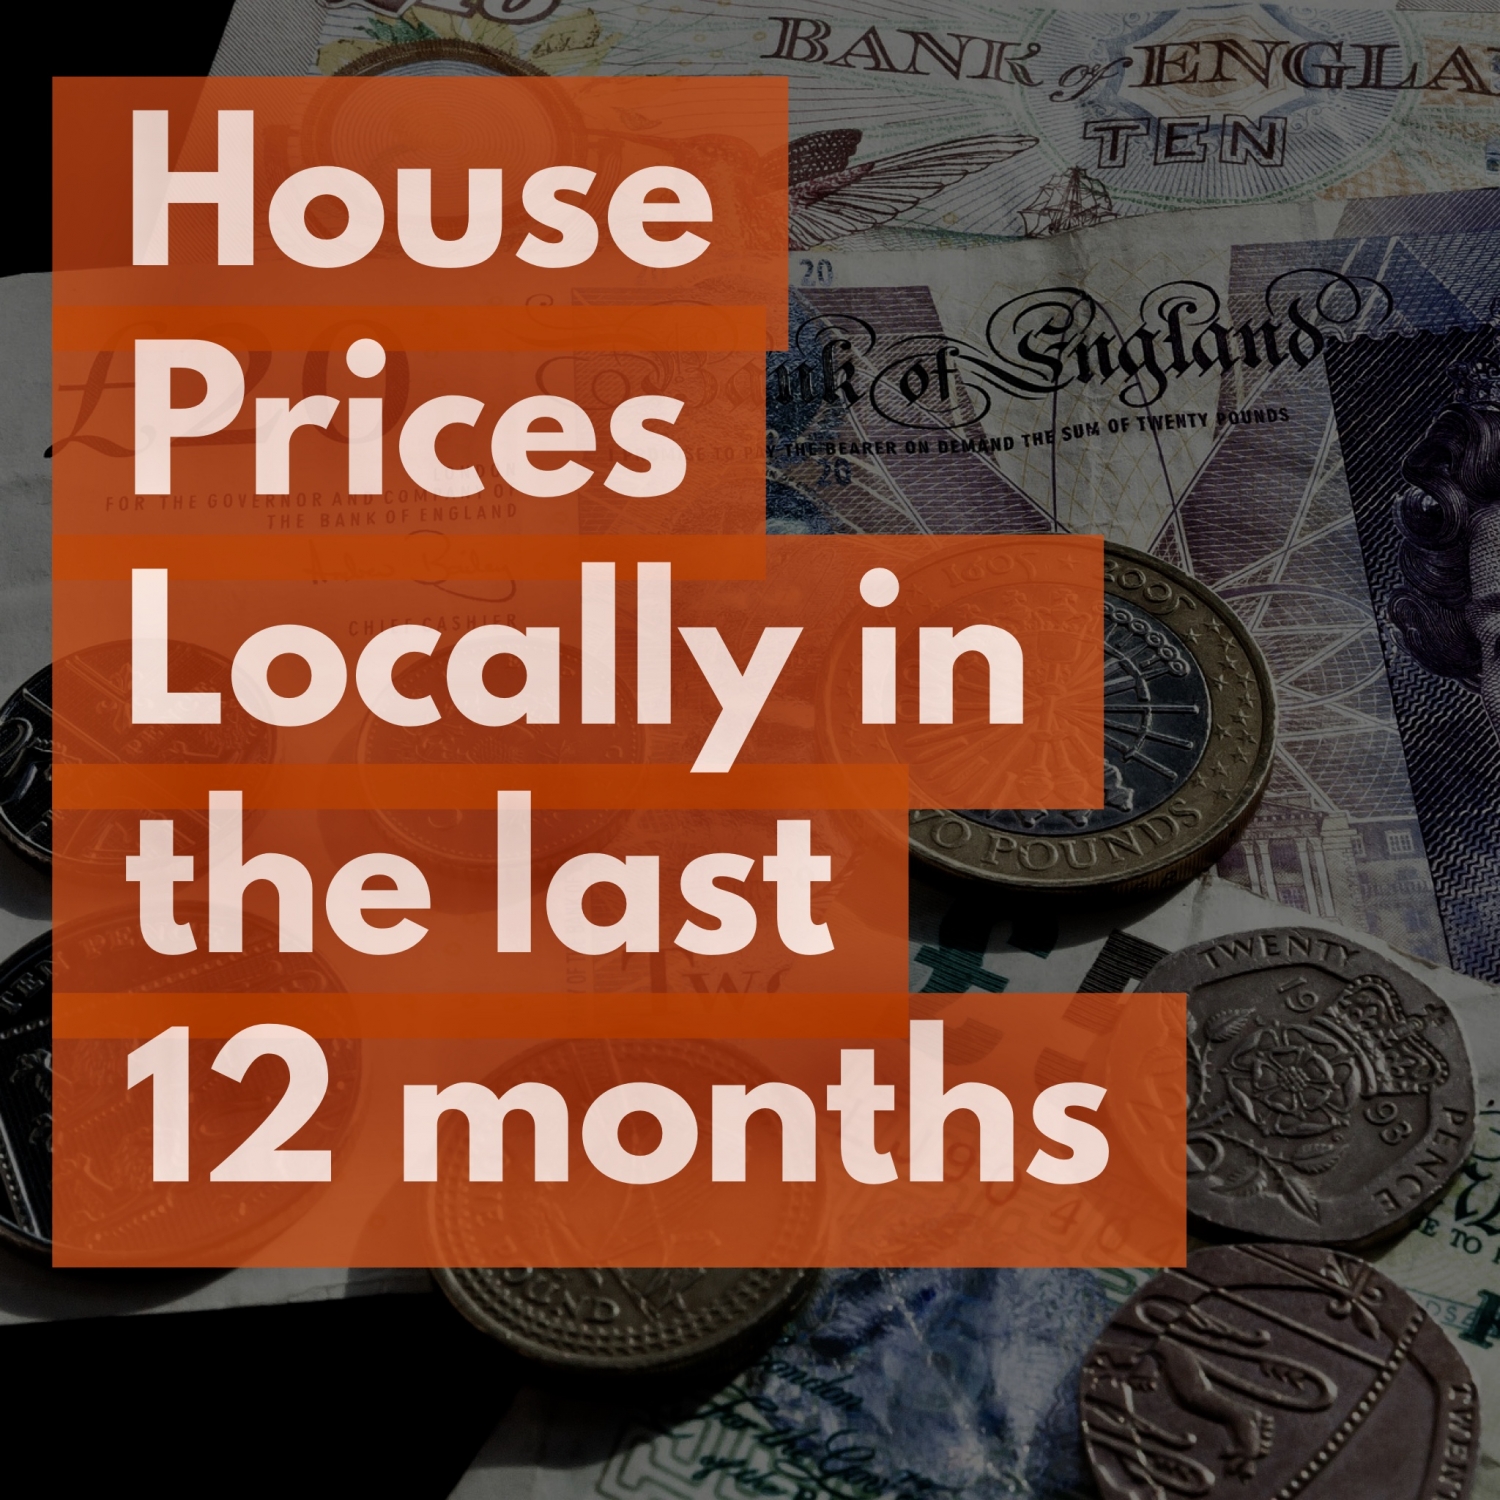 Sidcup House Prices Fall 0.3% in a Year